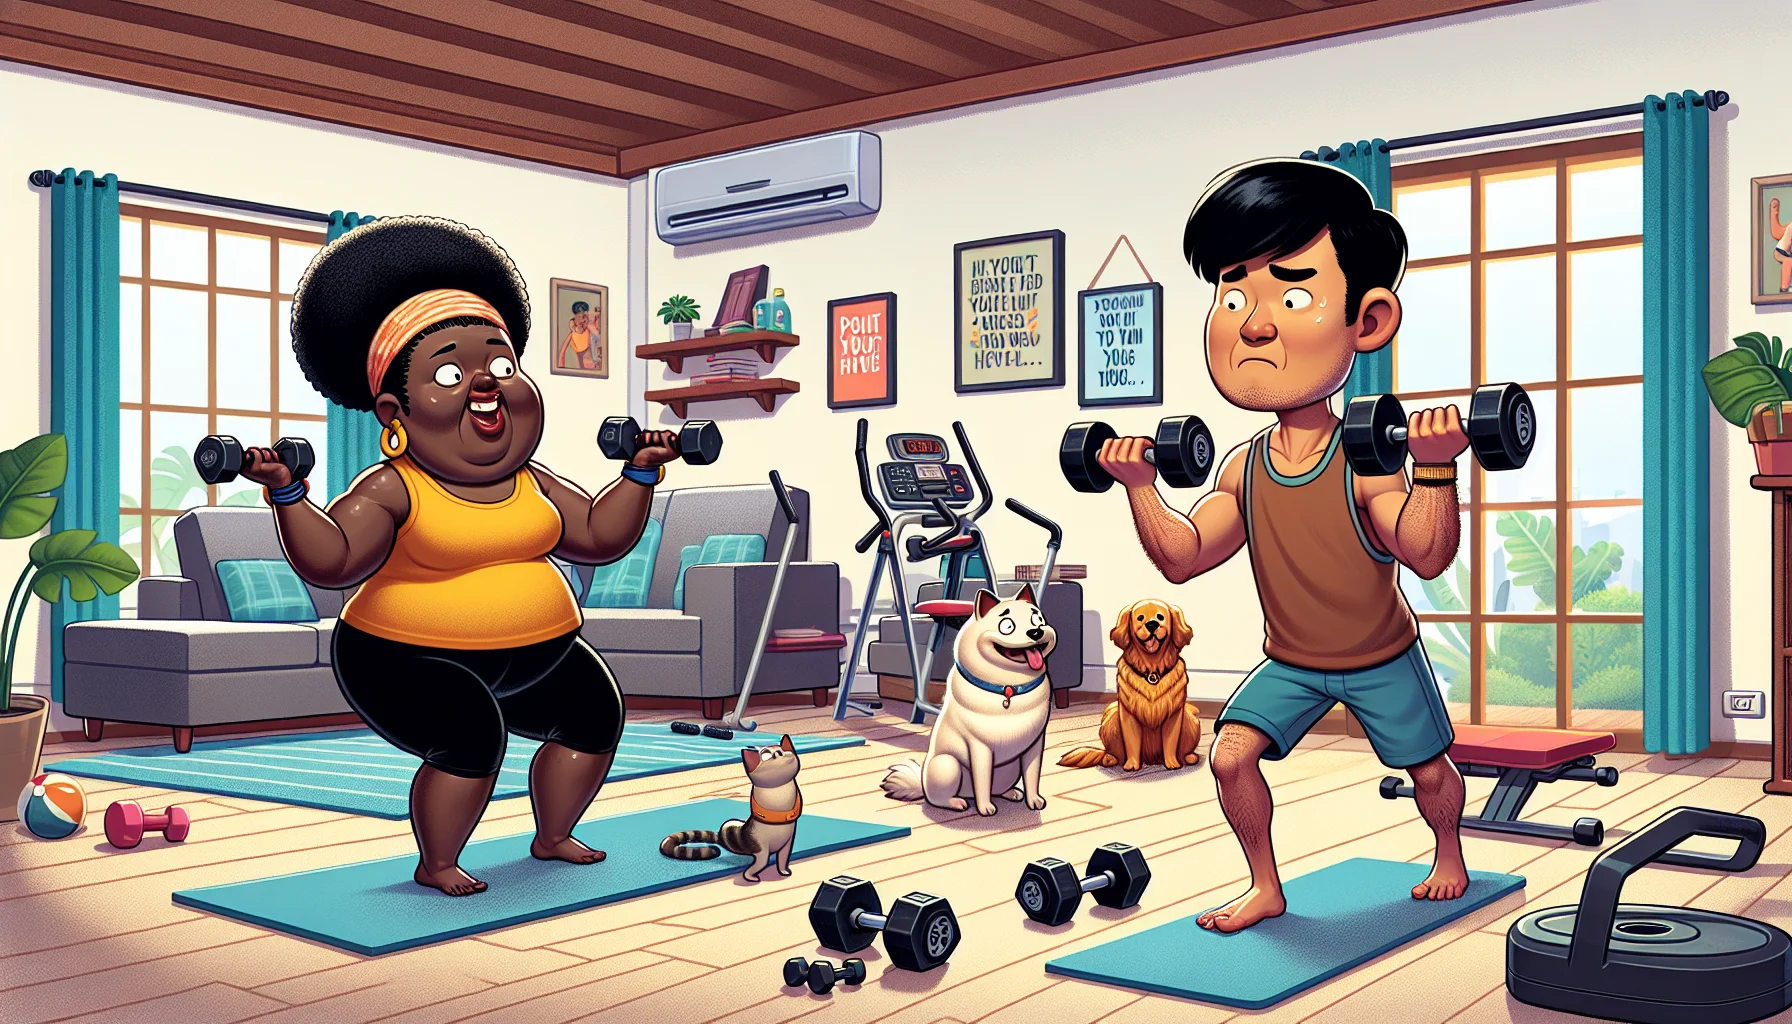 Illustrate a humorous and realistic scenario of at-home body sculpting. Imagine a middle-aged Black woman trying to balance yoga poses while her young Asian male neighbor is attempting to lift too-heavy dumbbells. Their equally befuddled pets, a golden retriever and a cat, are looking on from the corners. The room is full of typical exercise equipment and posters with motivational quotes. This playful scenario is designed to inspire people to exercise at home.